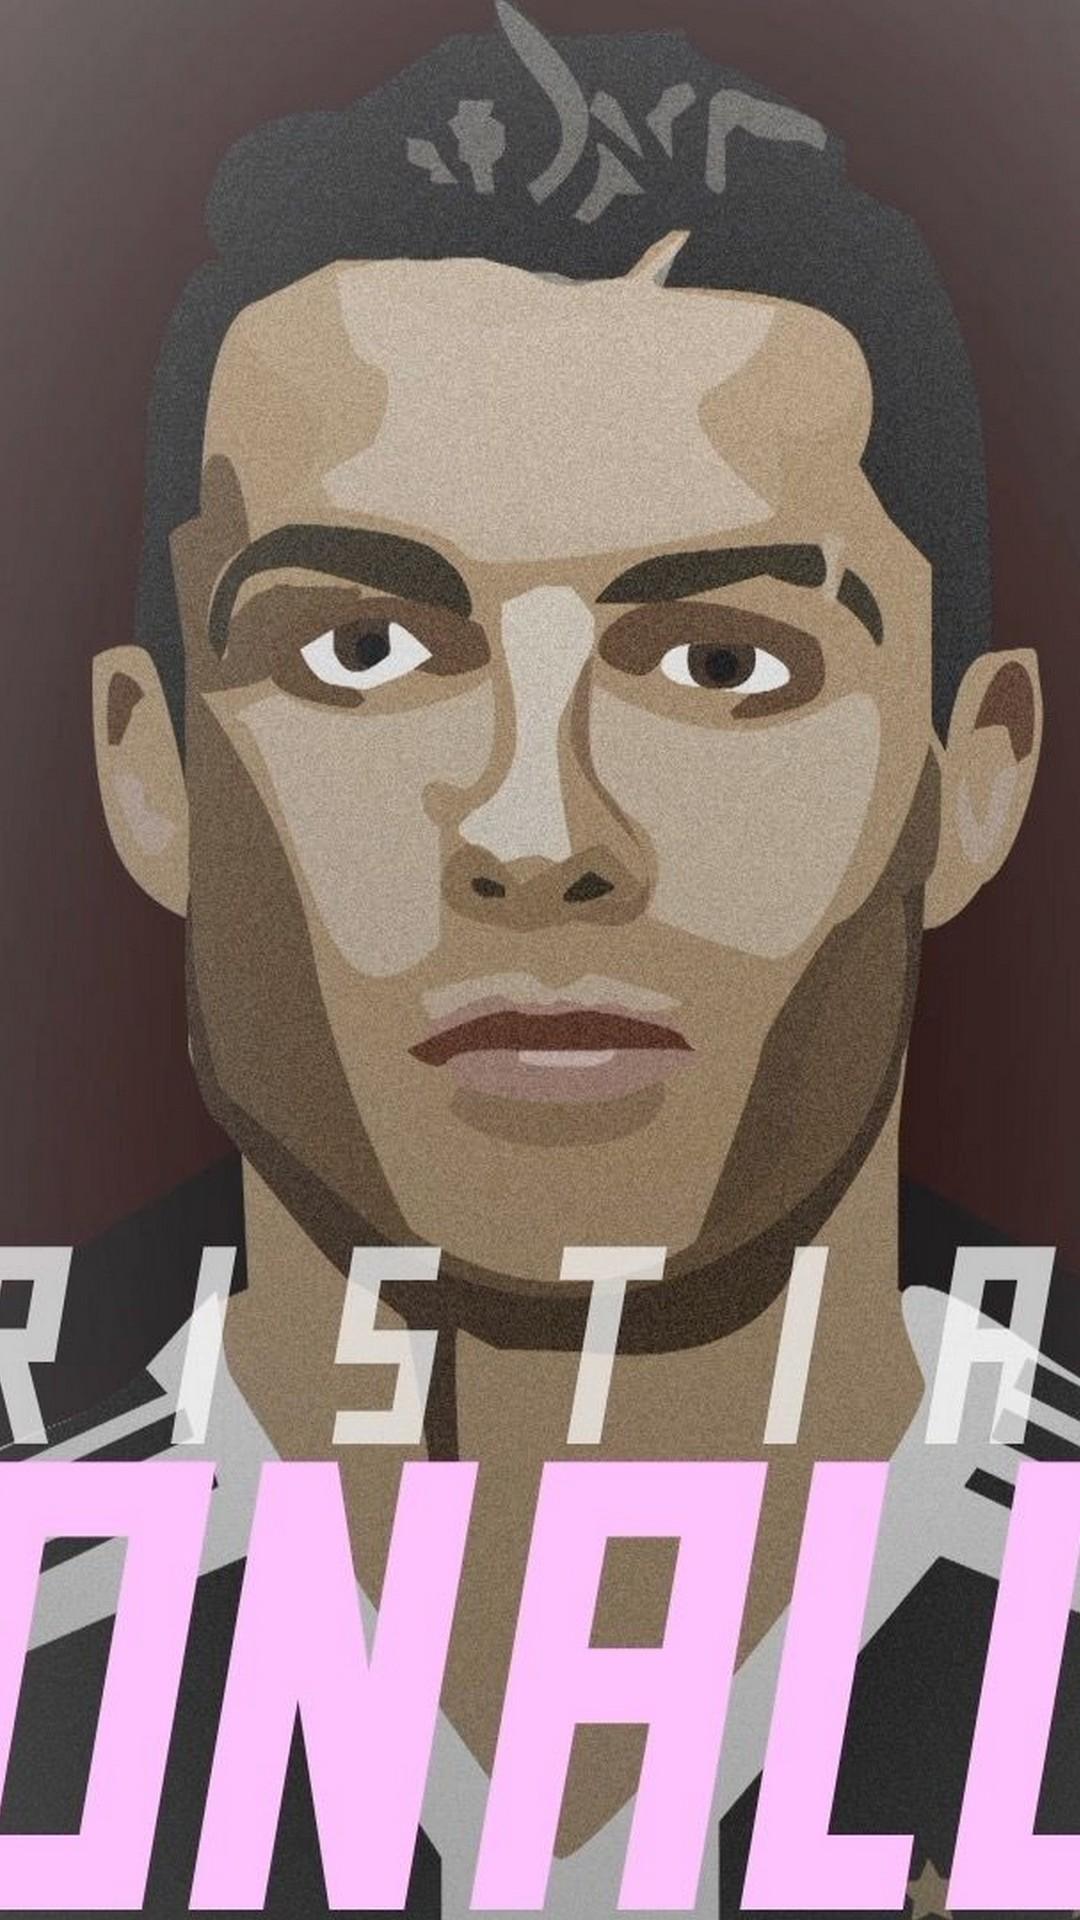 C Ronaldo Juventus Wallpaper For Android Android